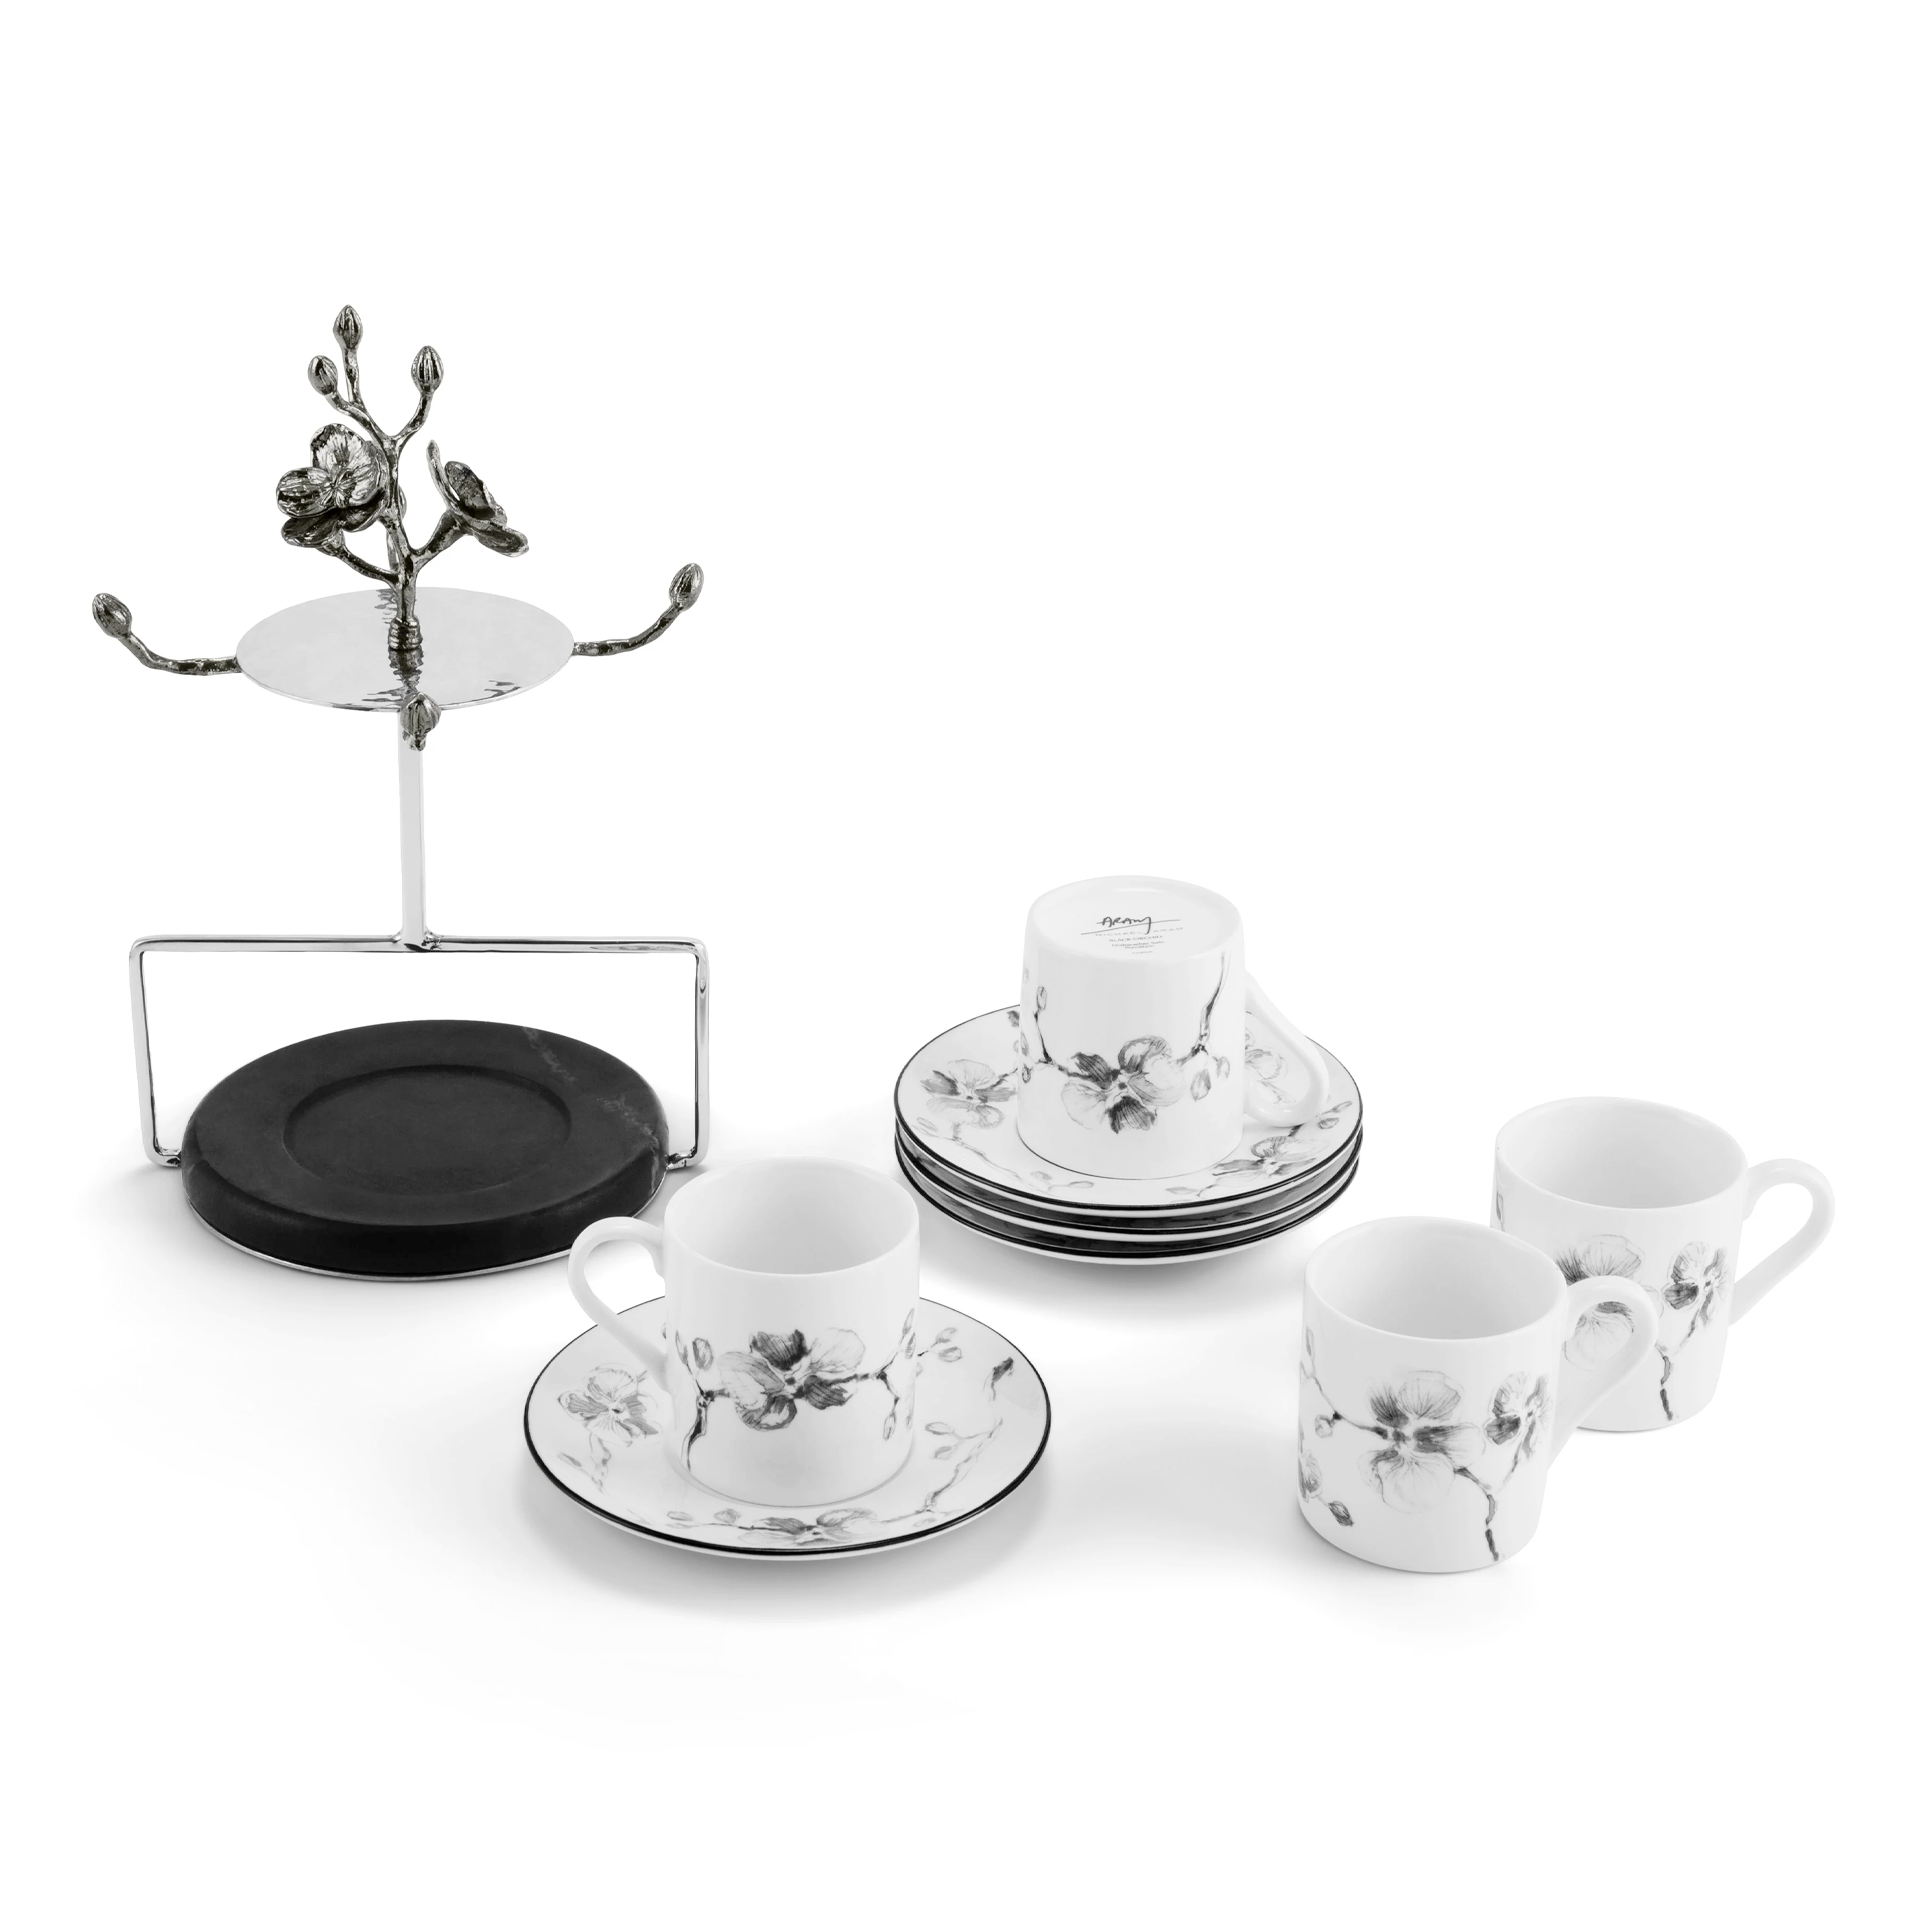 Black Orchid Demitasse Set with Stand, MICHAEL ARAM - RSVP Style